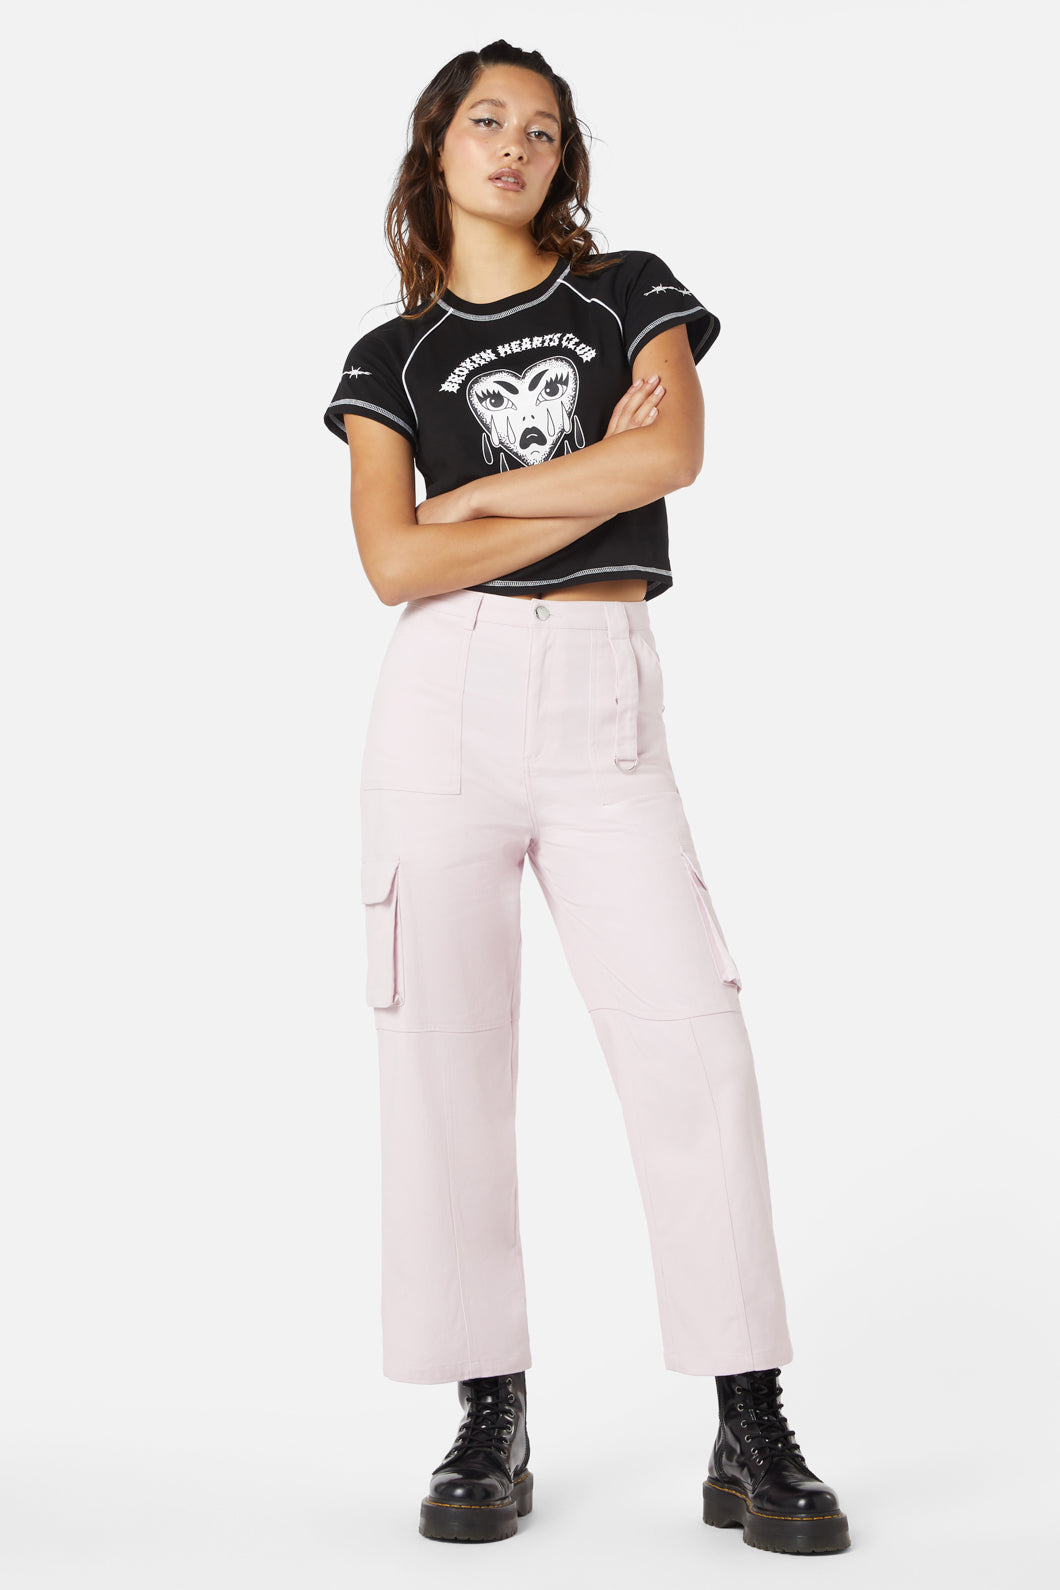 Randy Bell Bottom Pants - Black  Bell bottom pants outfit, Tie dye pants  outfit, Outfits with leggings